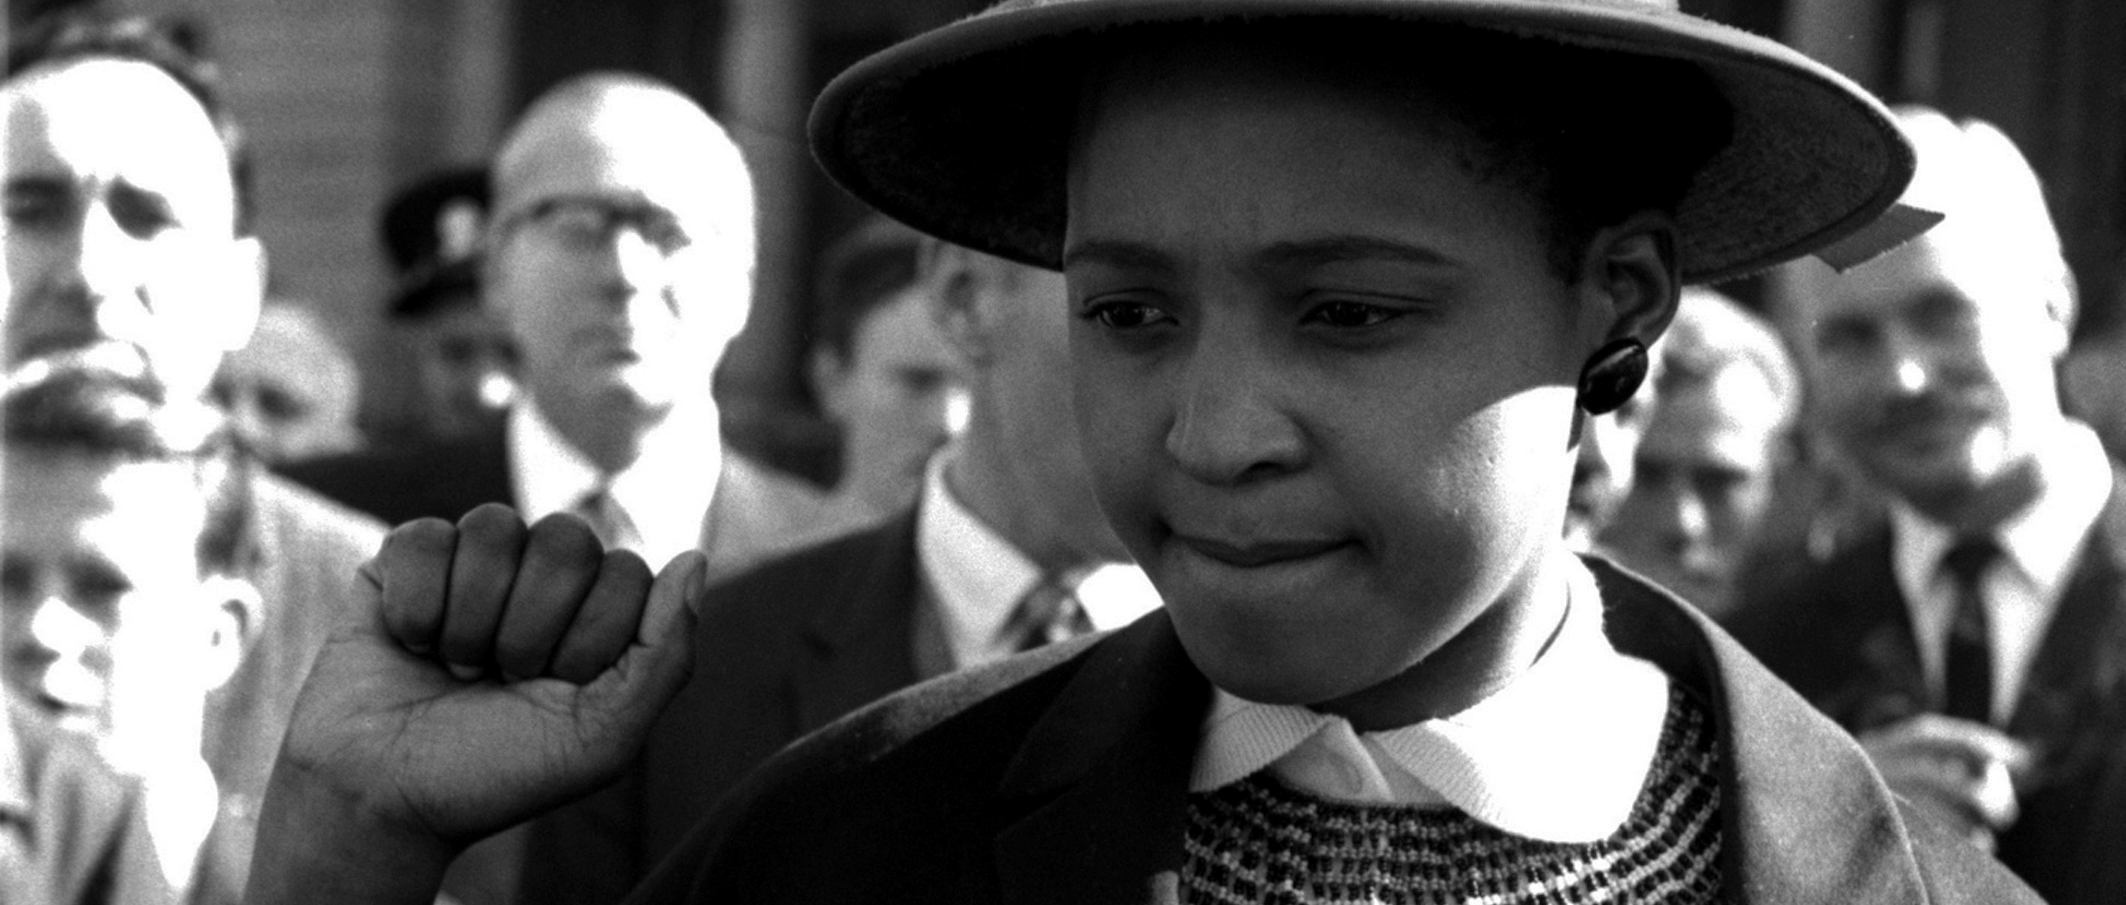 Image: Still from 'The State vs. Nelson Mandela and the Others'. Winnie Mandela at the Rivonia Trial.